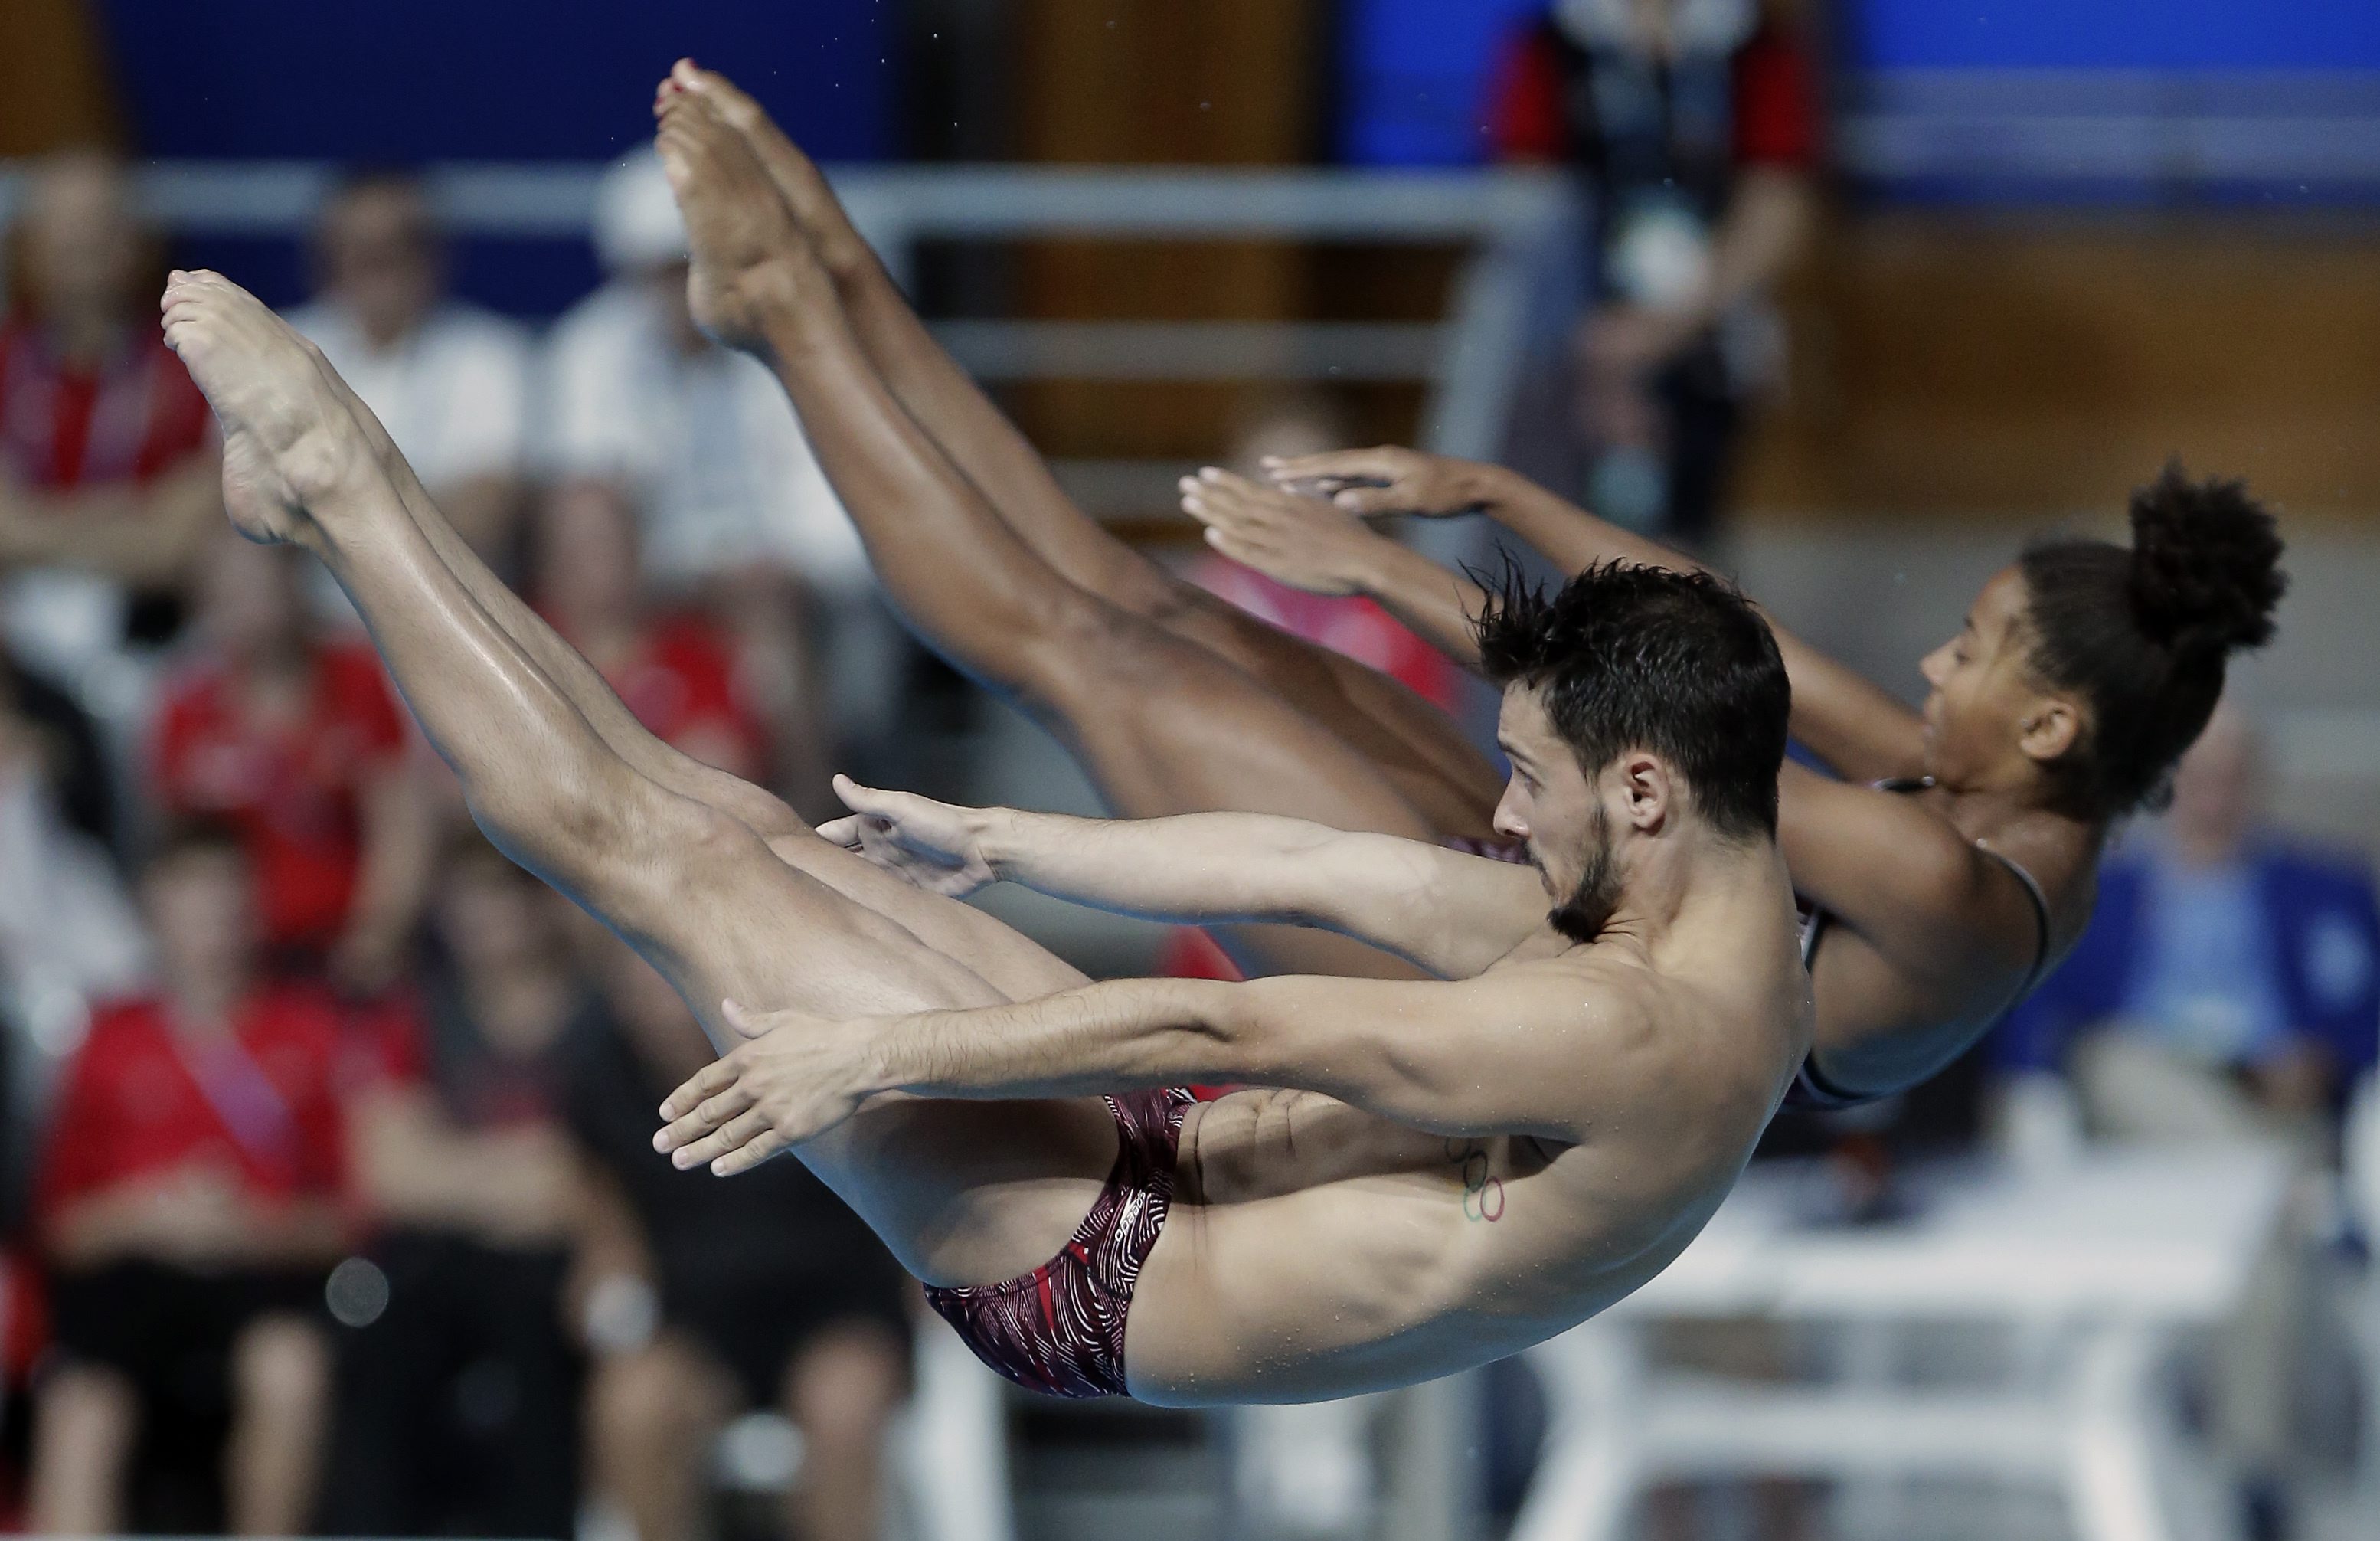 Canada's silver medalists Jennifer Abel and Francois Imbeau-Dulac perform during the mixed 3 m synchro springboard final at the Swimming World Championships in Kazan, Russia, Sunday, Aug. 2, 2015. (AP Photo/Michael Sohn)